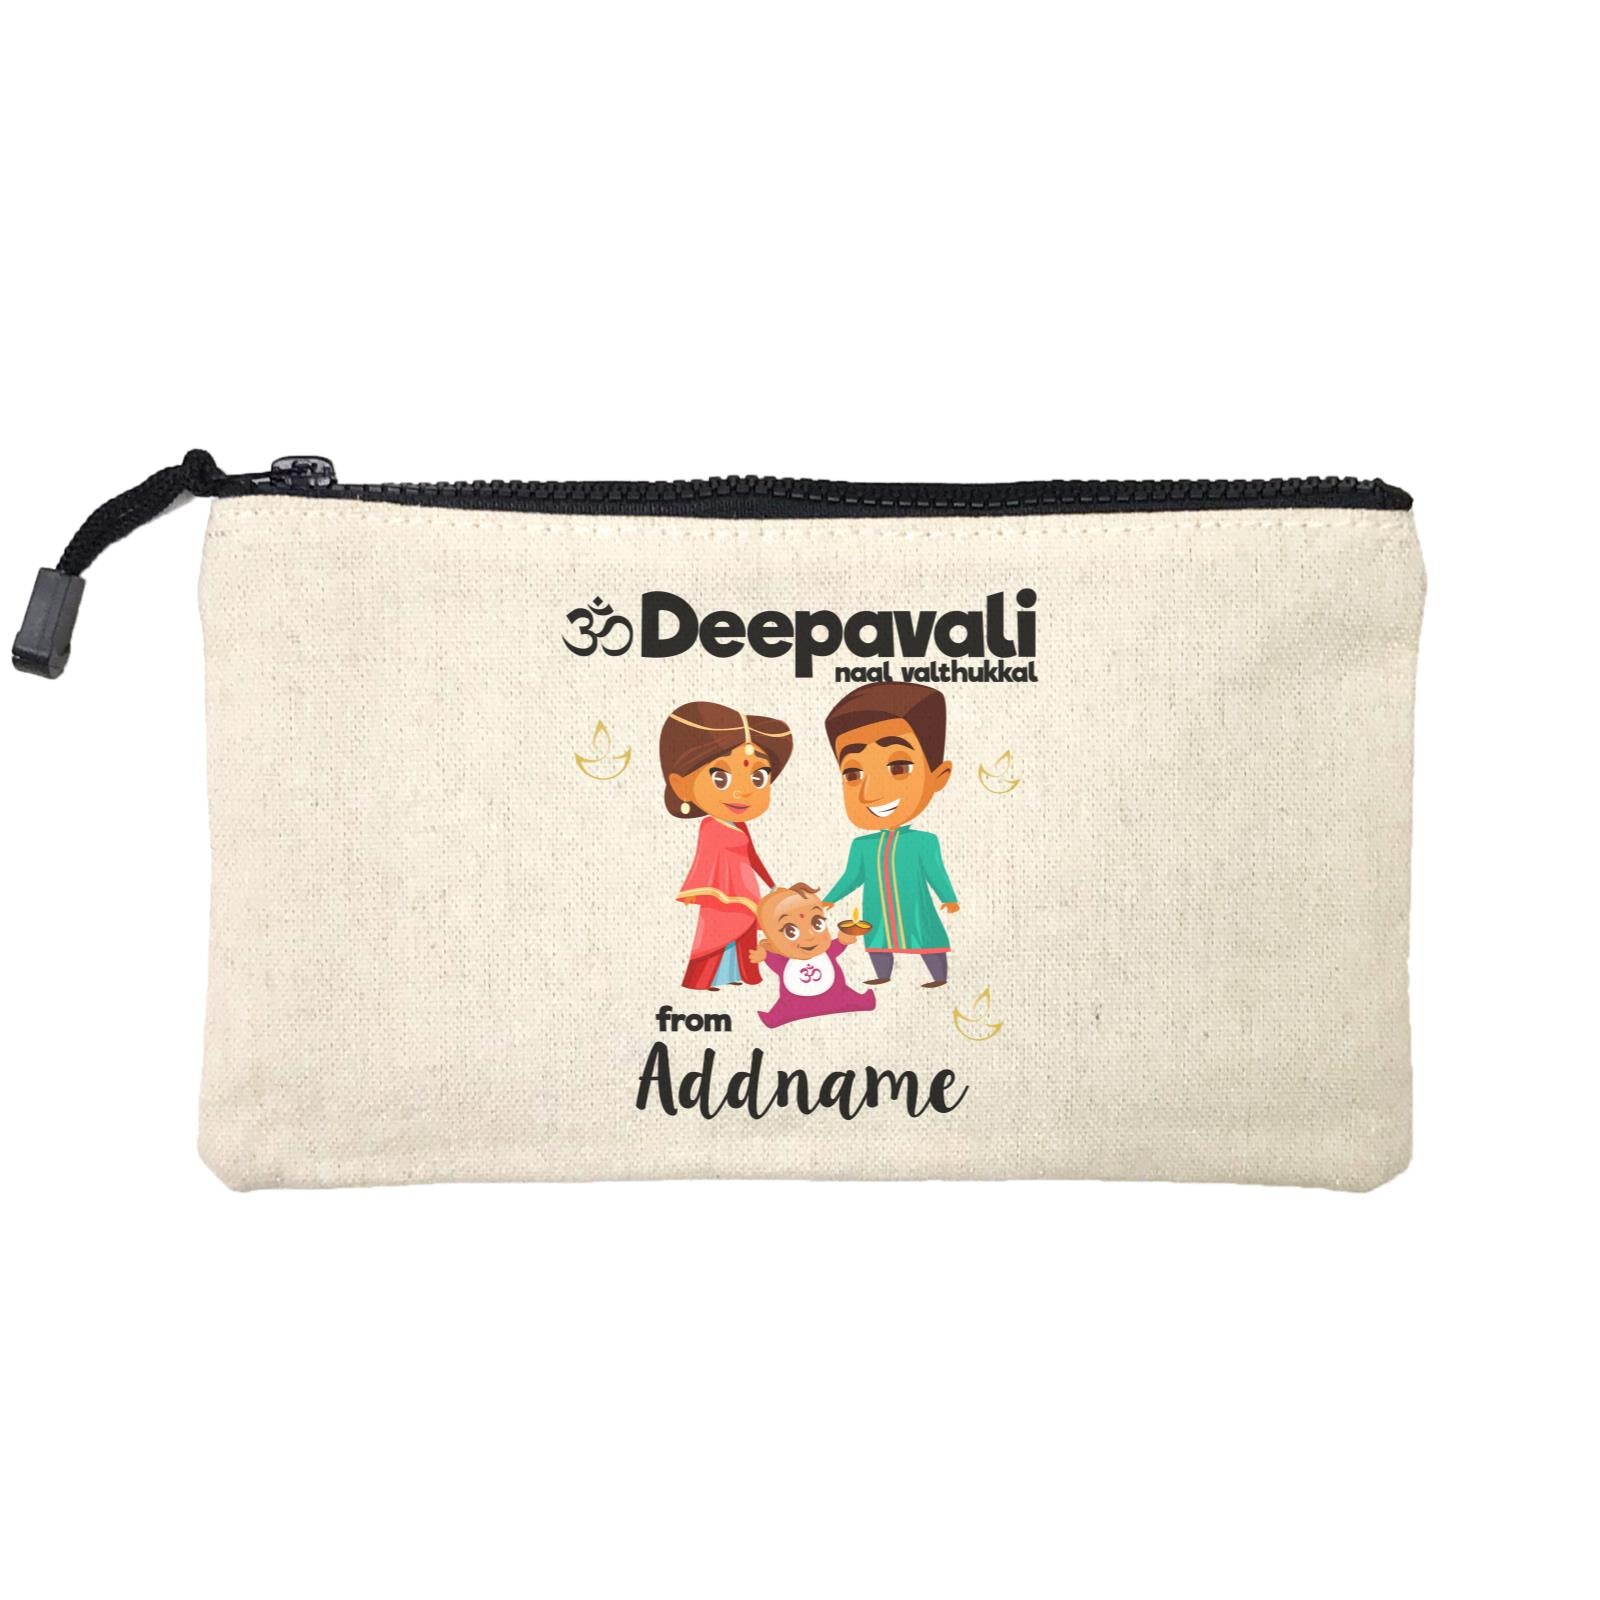 Cute Family Of Three OM Deepavali From Addname Mini Accessories Stationery Pouch